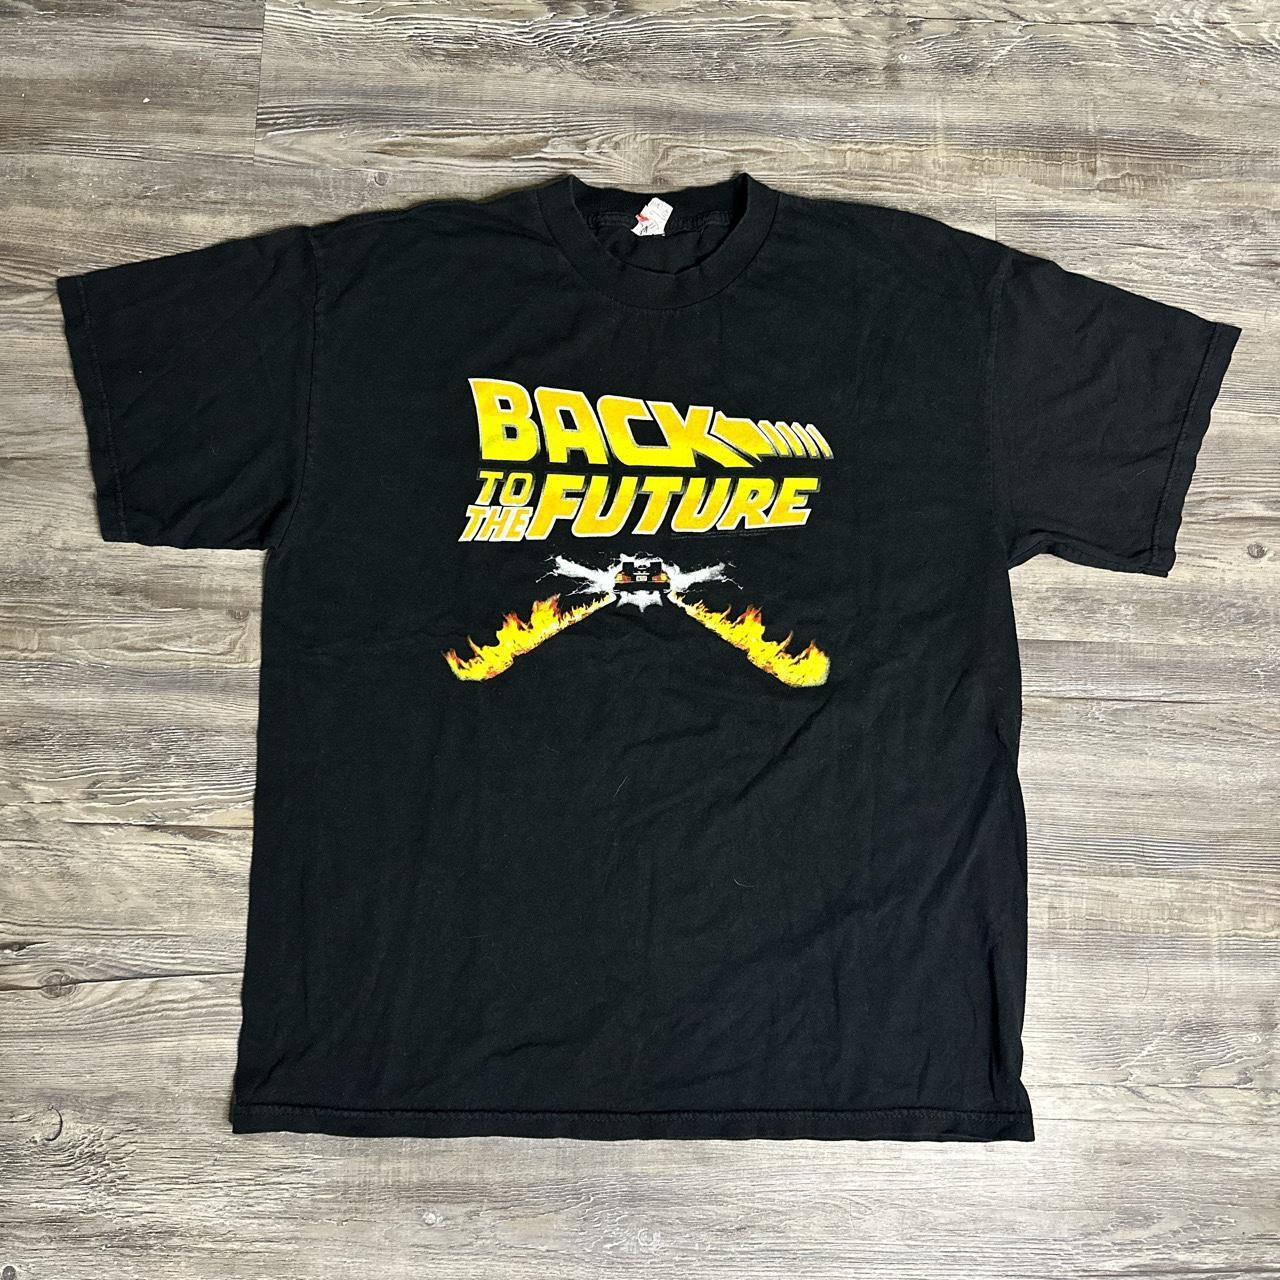 Back to the Future 90s promo t-shirt, #vintage #90s